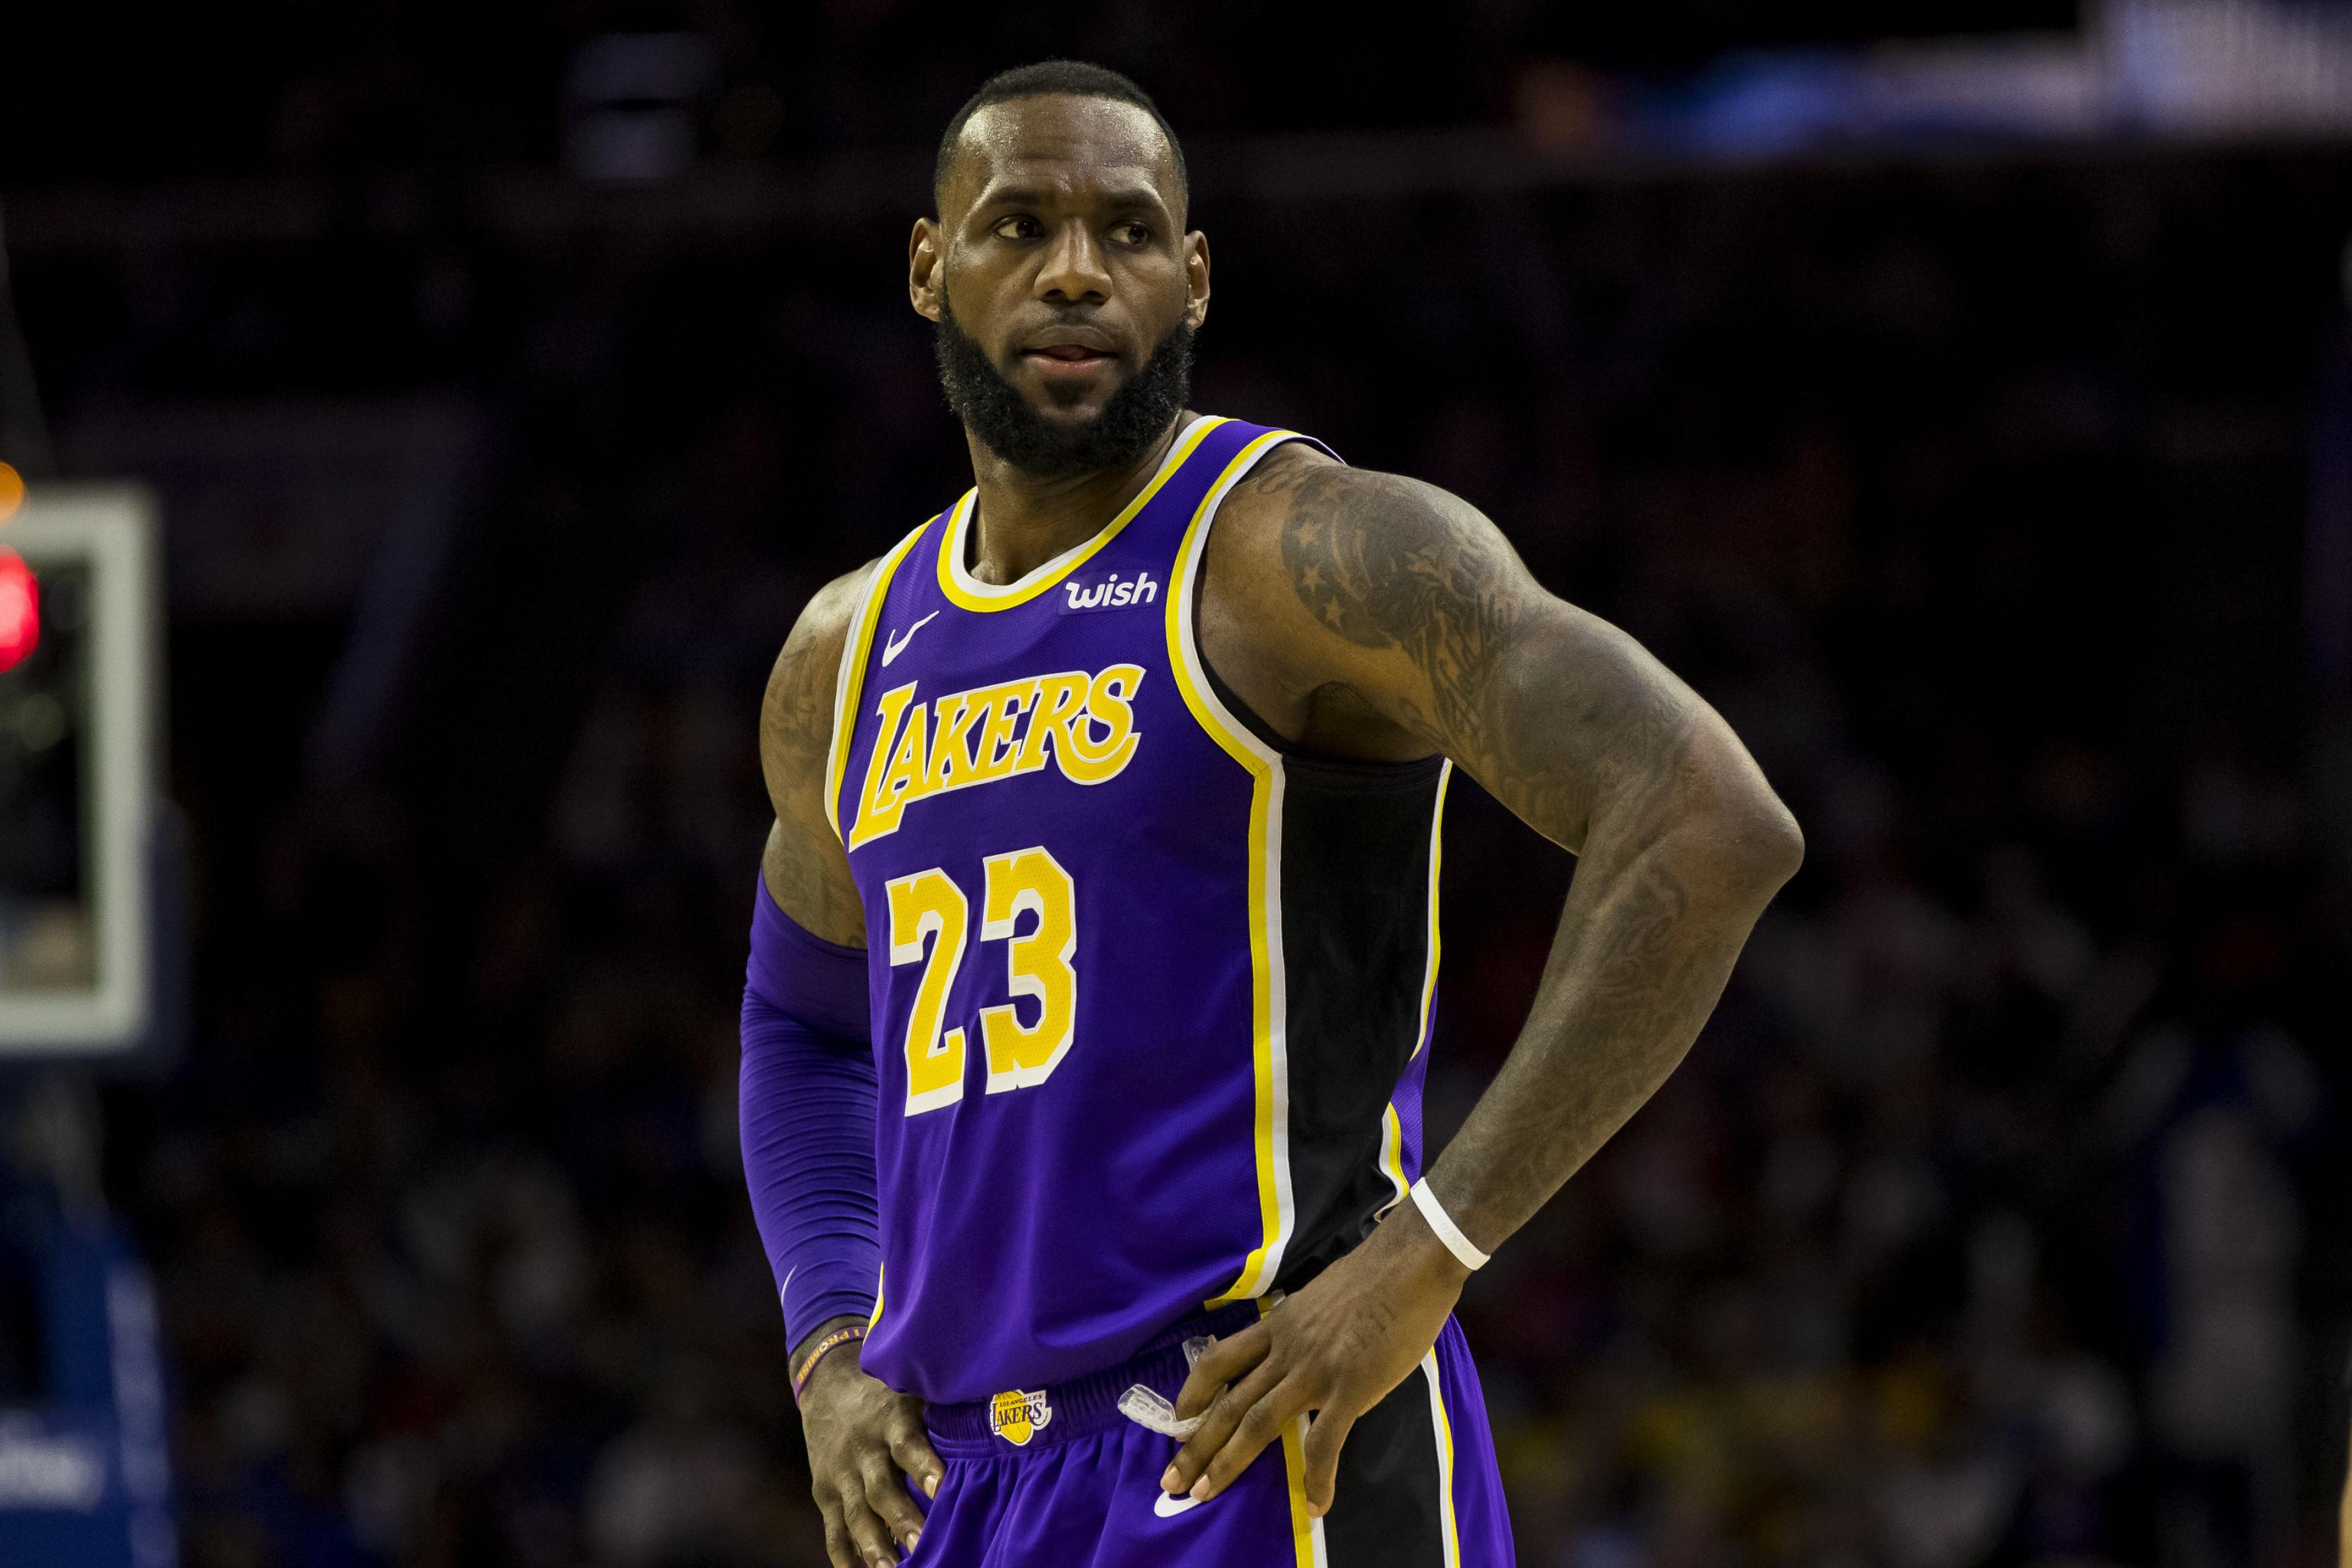 LeBron James Says He Wears No. 23 for 'The Great Michael Jordan', News,  Scores, Highlights, Stats, and Rumors